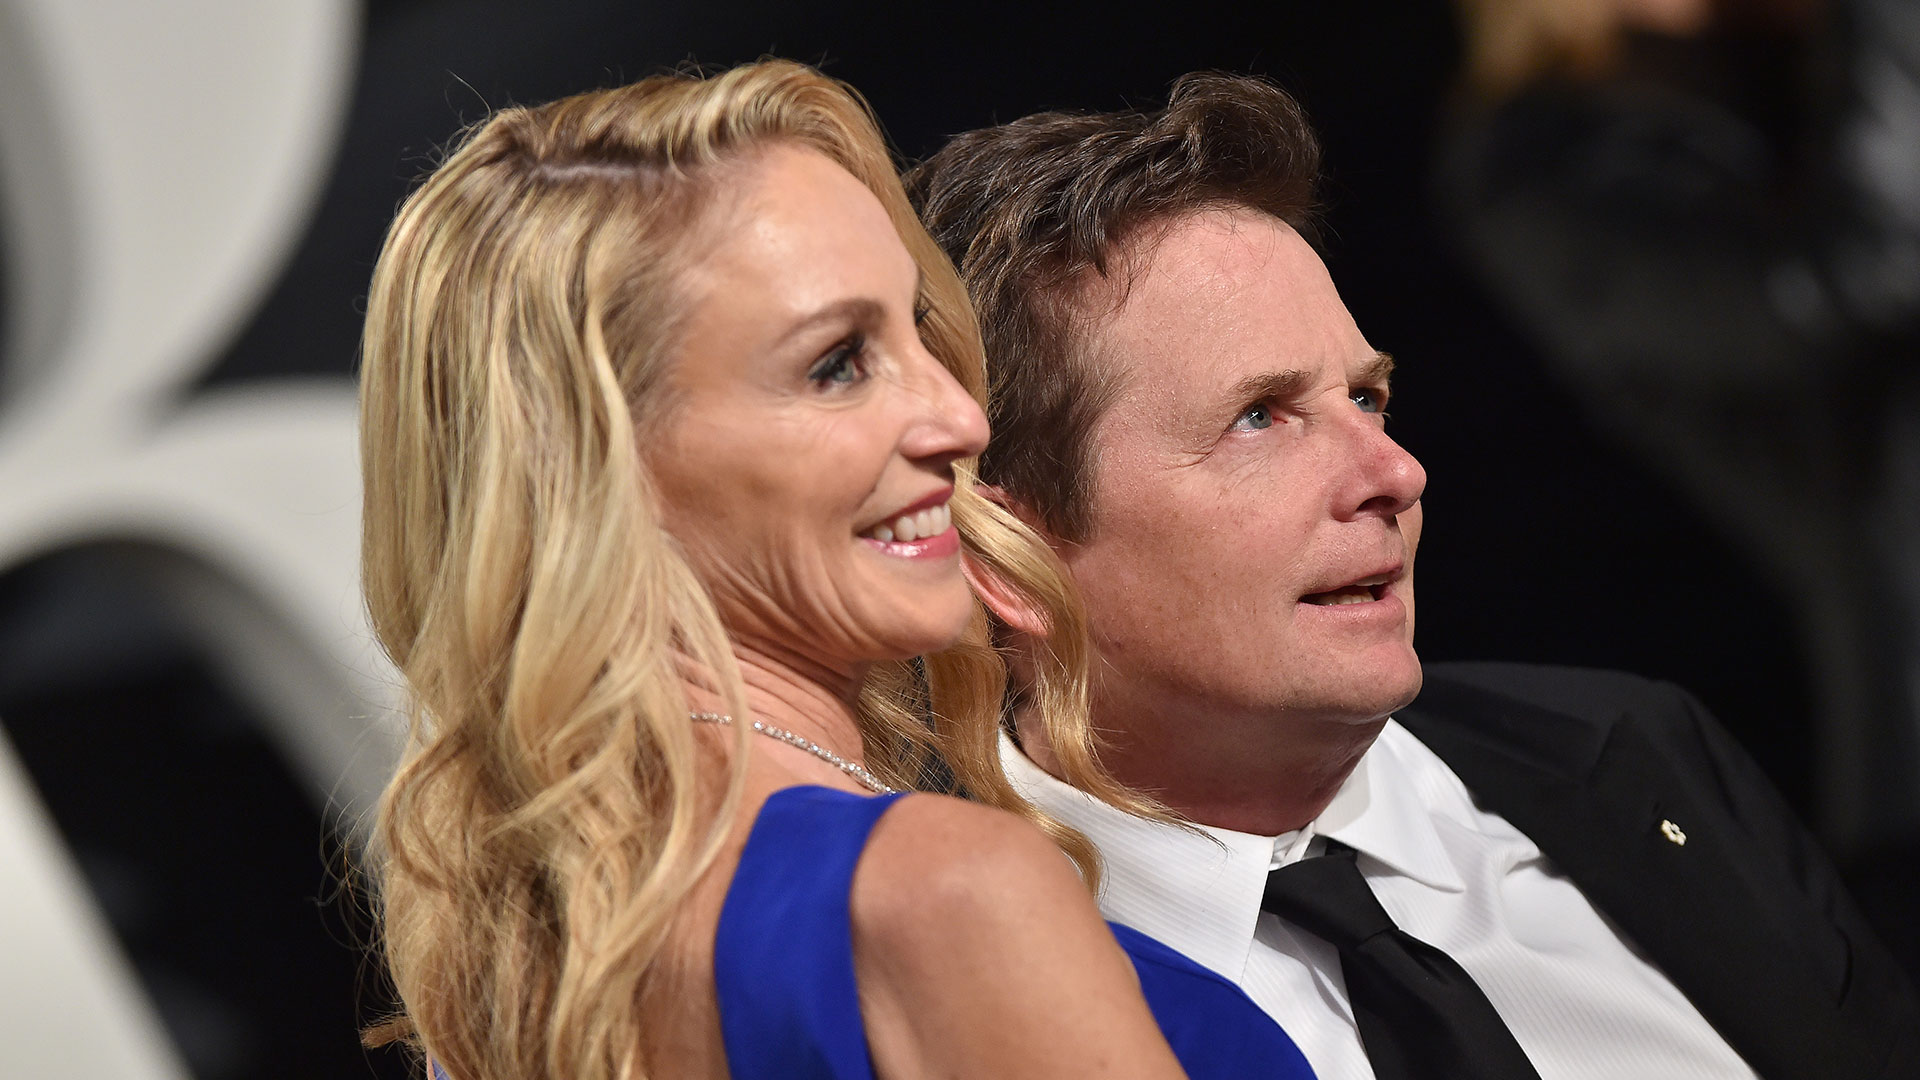   Michael J. Fox with his wife Tracy Pollan (Photo by Axelle/Bauer-Griffin/FilmMagic)